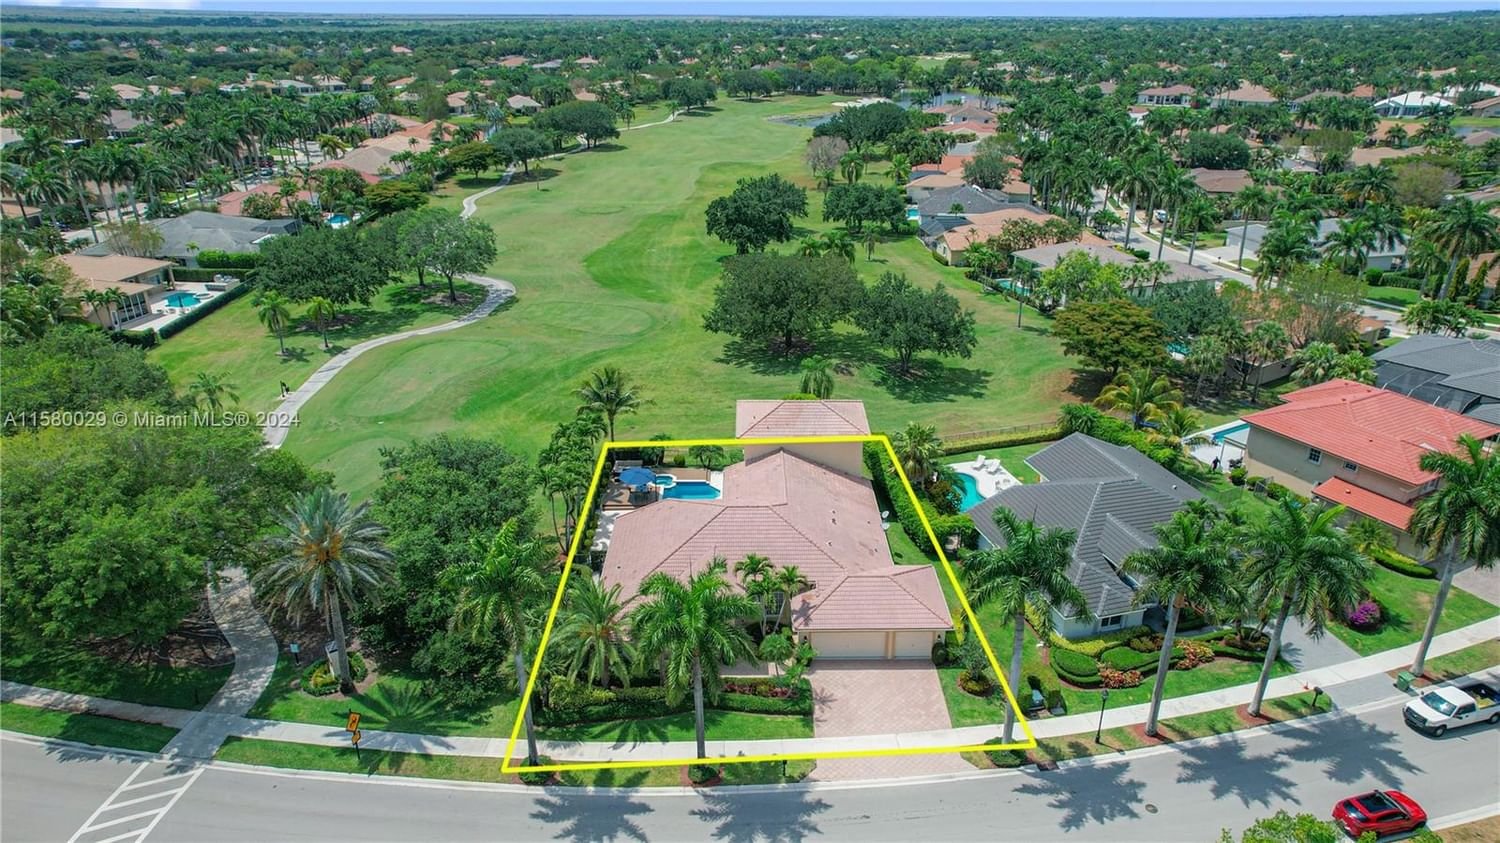 Real estate property located at 2541 Golf View Dr, Broward County, SECTOR 7 - PARCELS F G H, Weston, FL